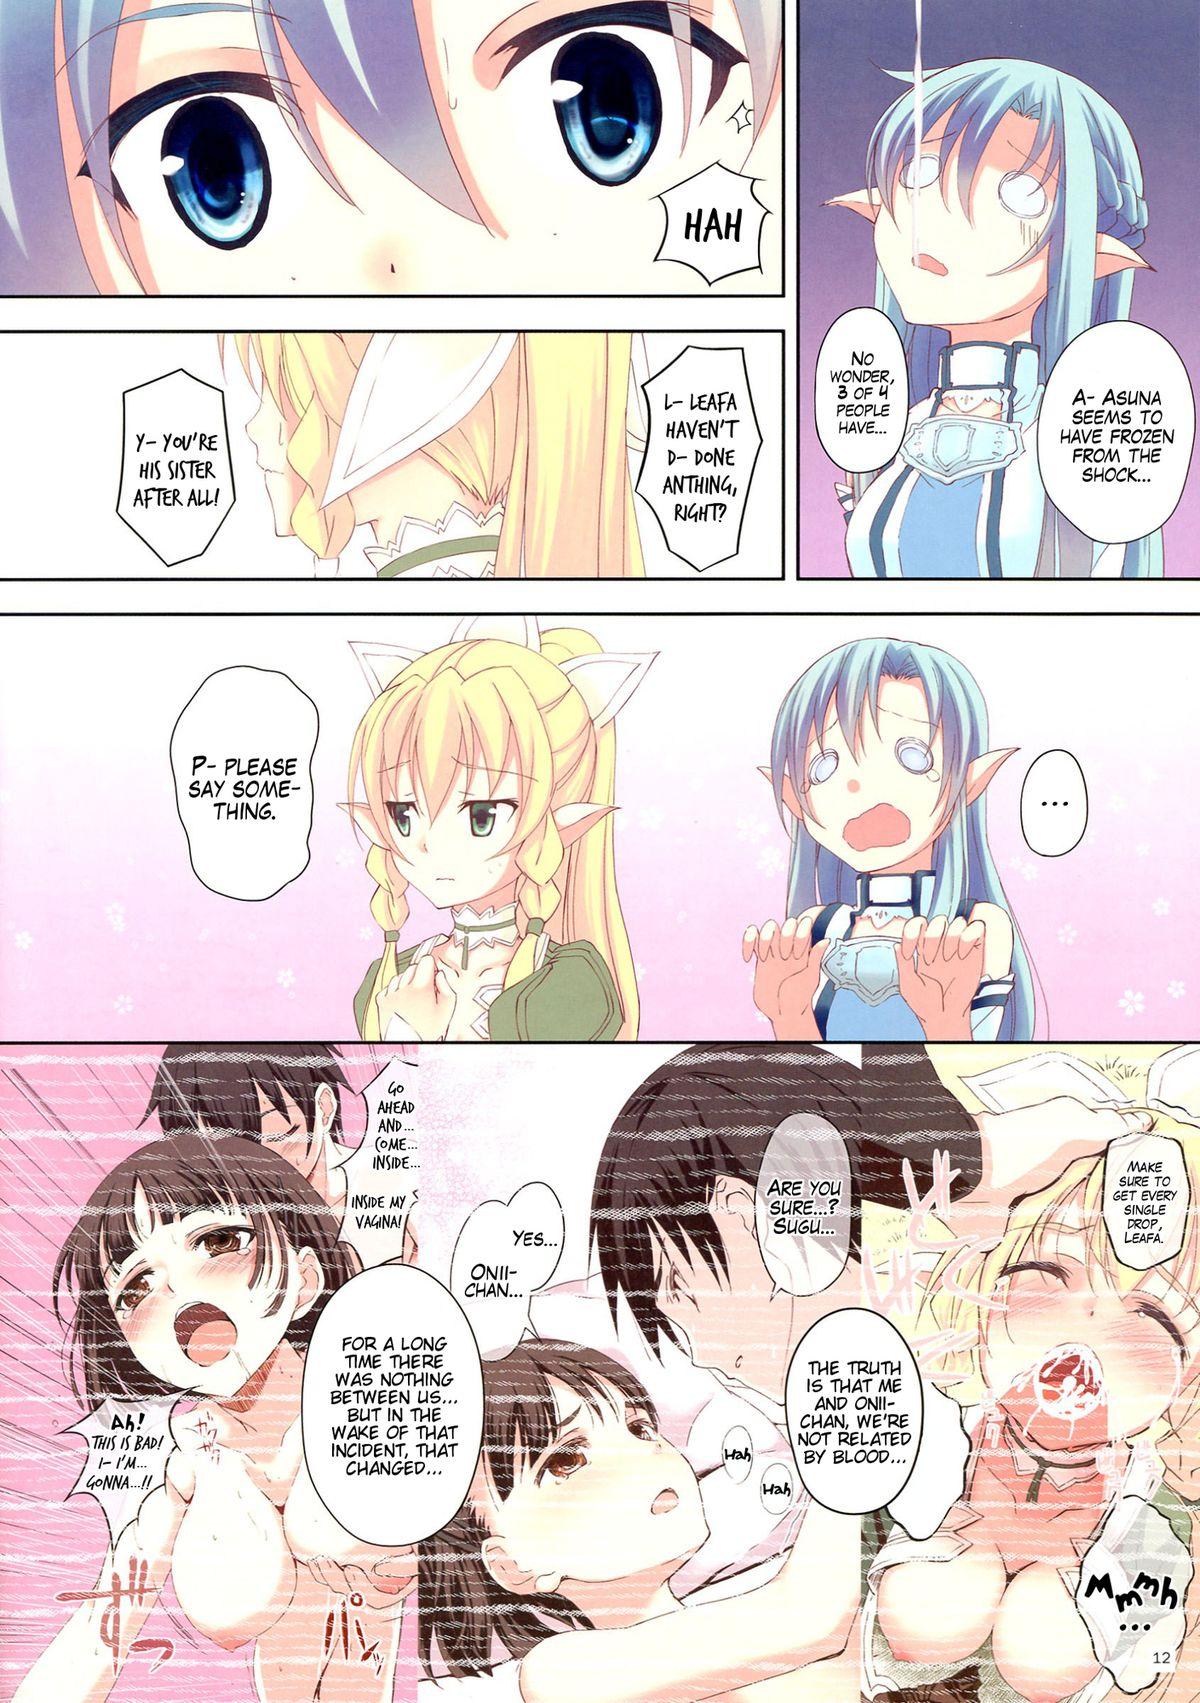 Gaping Mad Tea Party - Sword art online Massive - Page 12